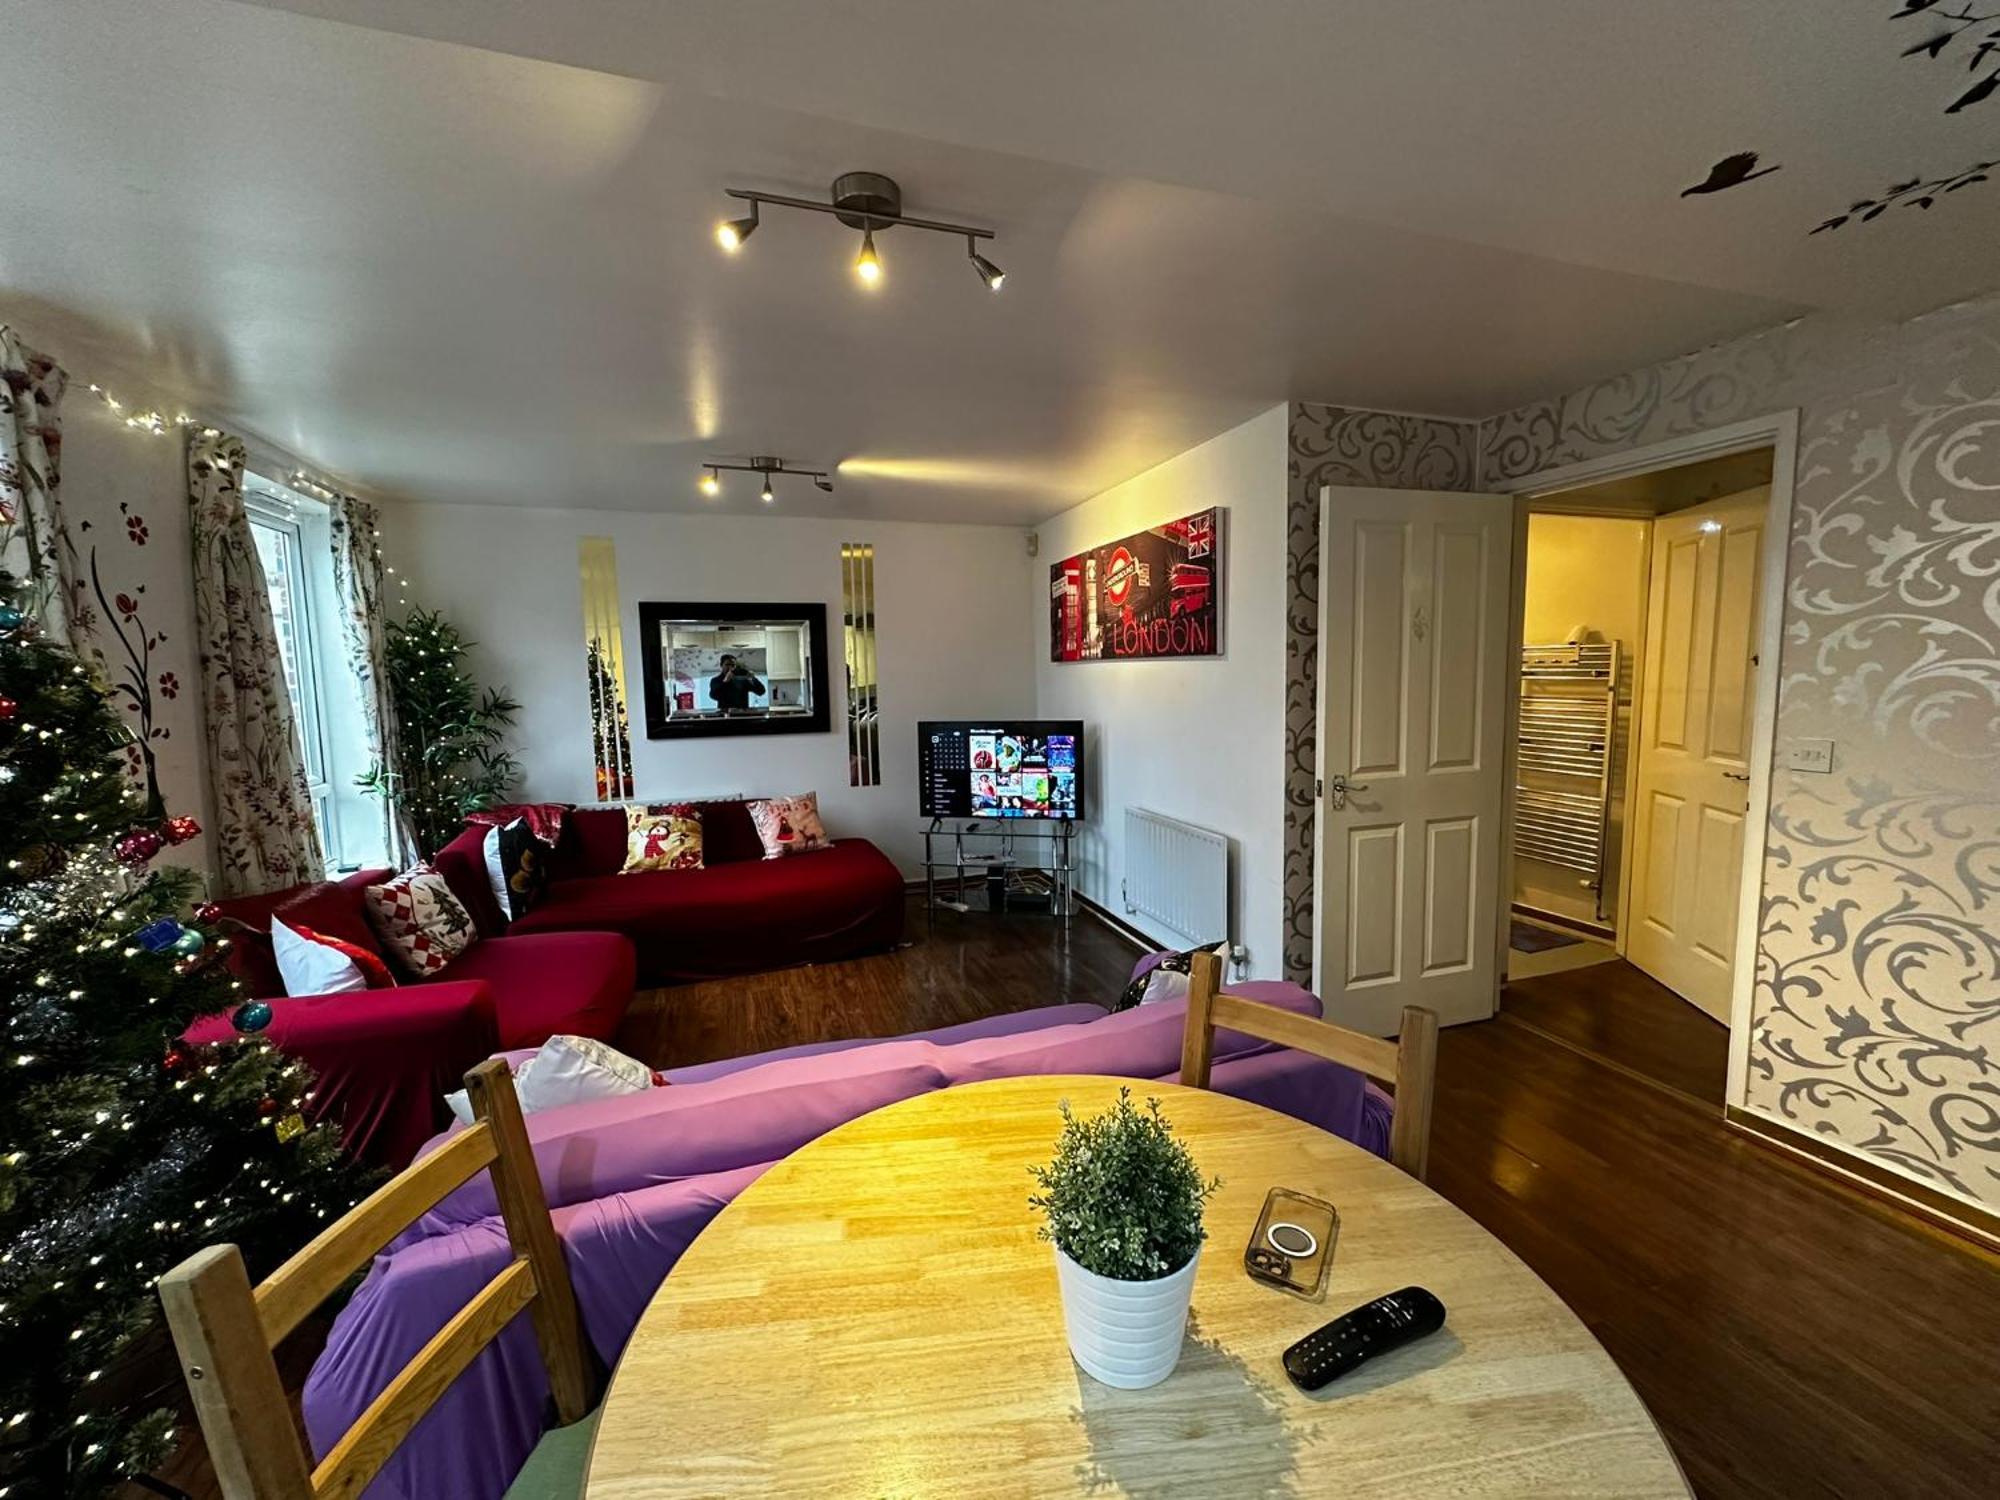 London 2 Bed 2 Bath Apartment Holiday Home - Free Parking - 3Min Walk To The Train Station - 19Min To London Liverpool Street 5Min To Victoria Line 1Gb Broadband Super Fast Internet Ground Floor 100S Of Shops Restaurants Bakeries 24-Hour Asda Superst Exterior photo